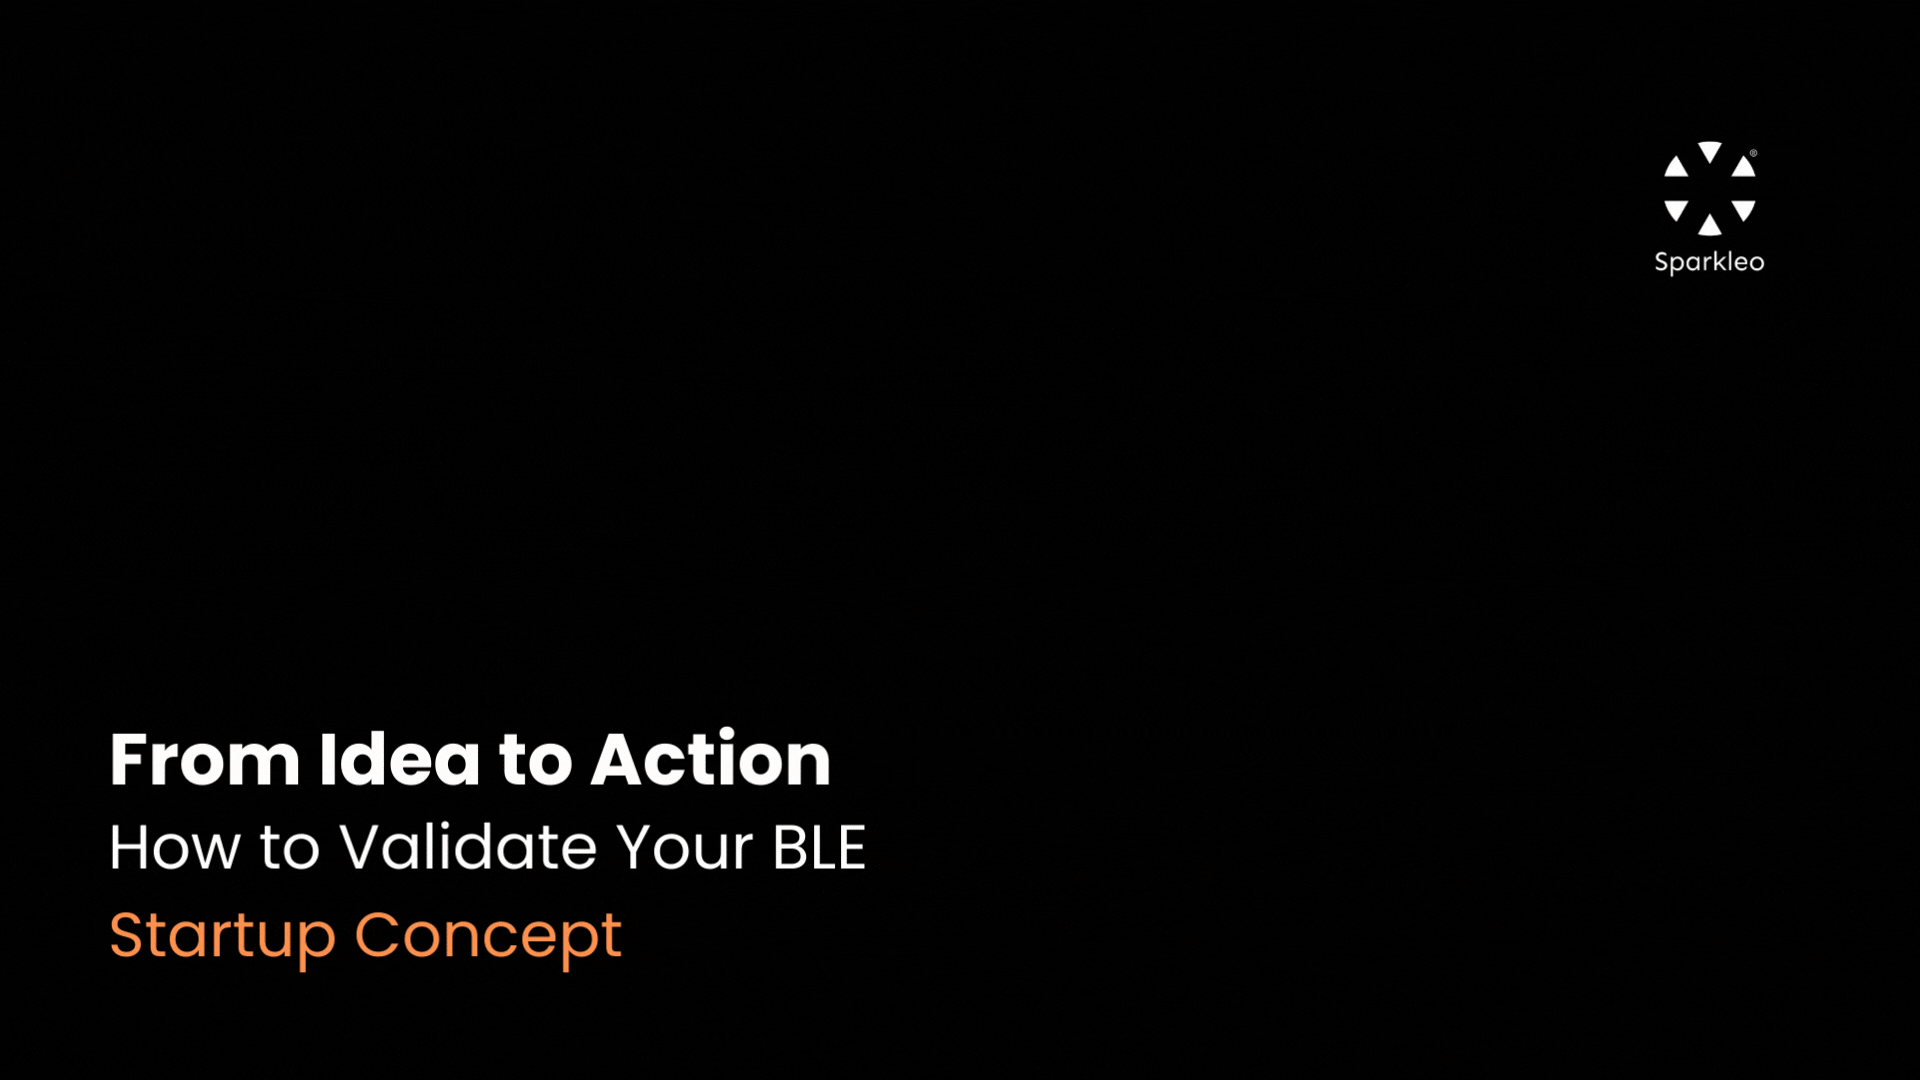 From Idea to Action: How to Validate Your BLE Startup Concept